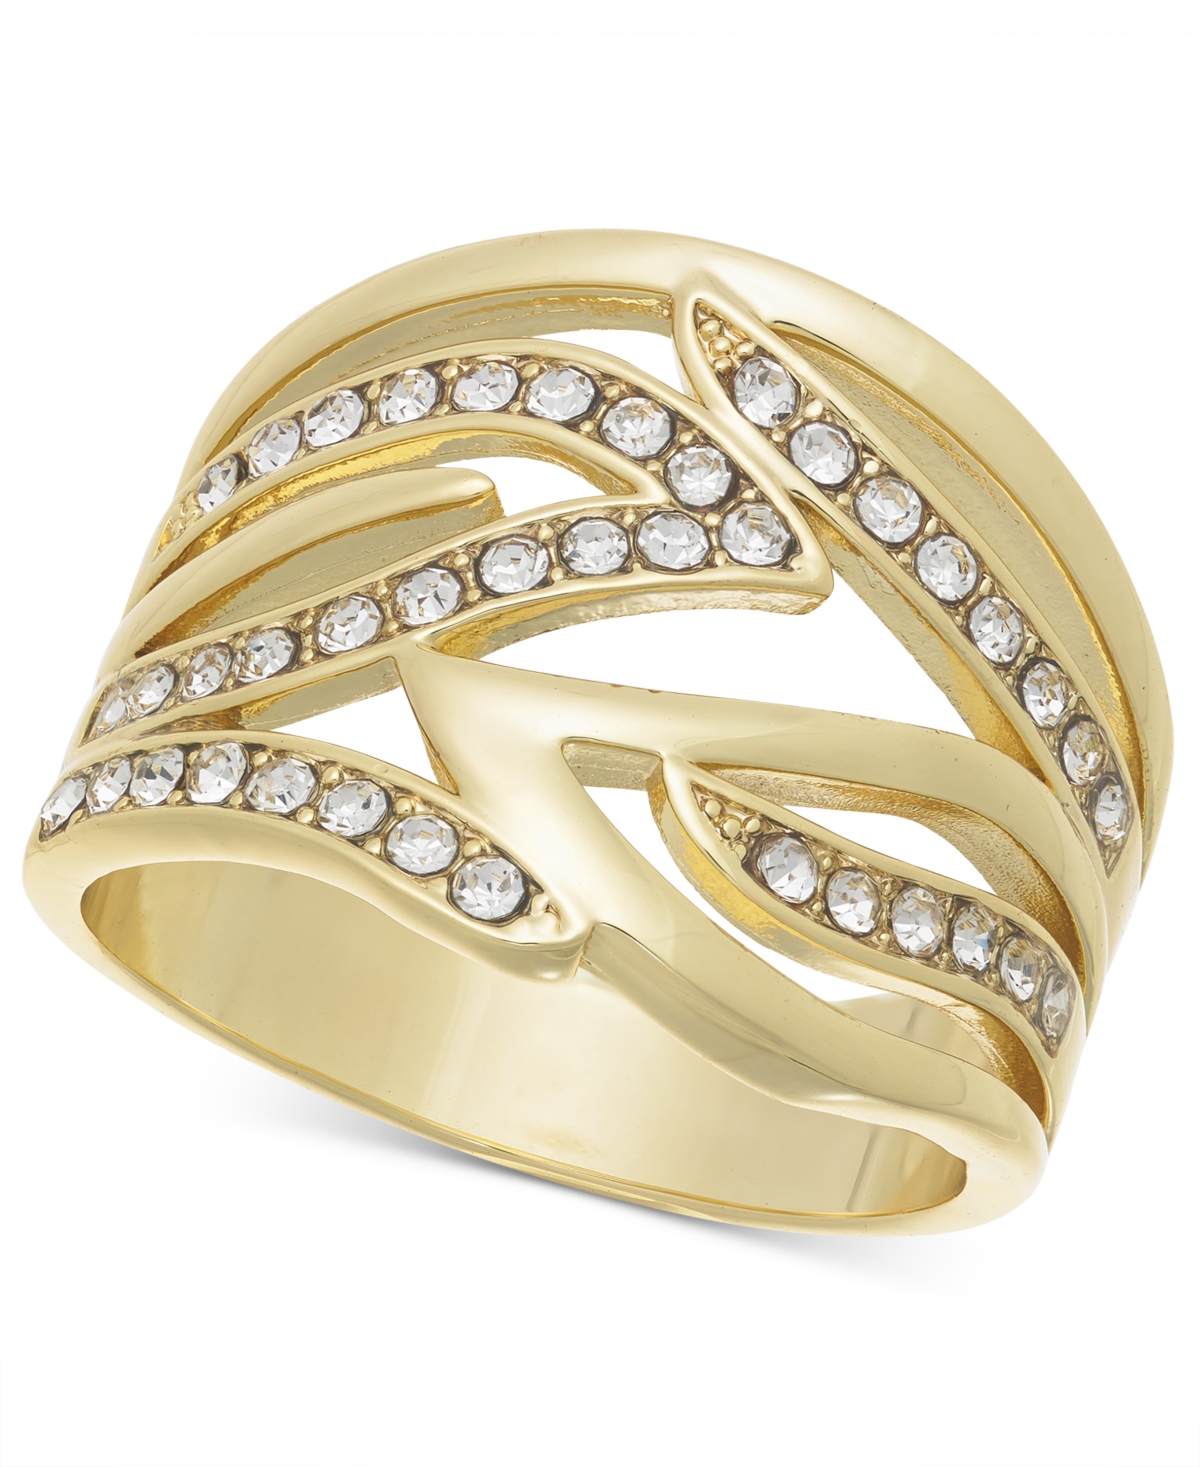 Gold-Tone Pave Flame Ring, Created for Macy's - Gold